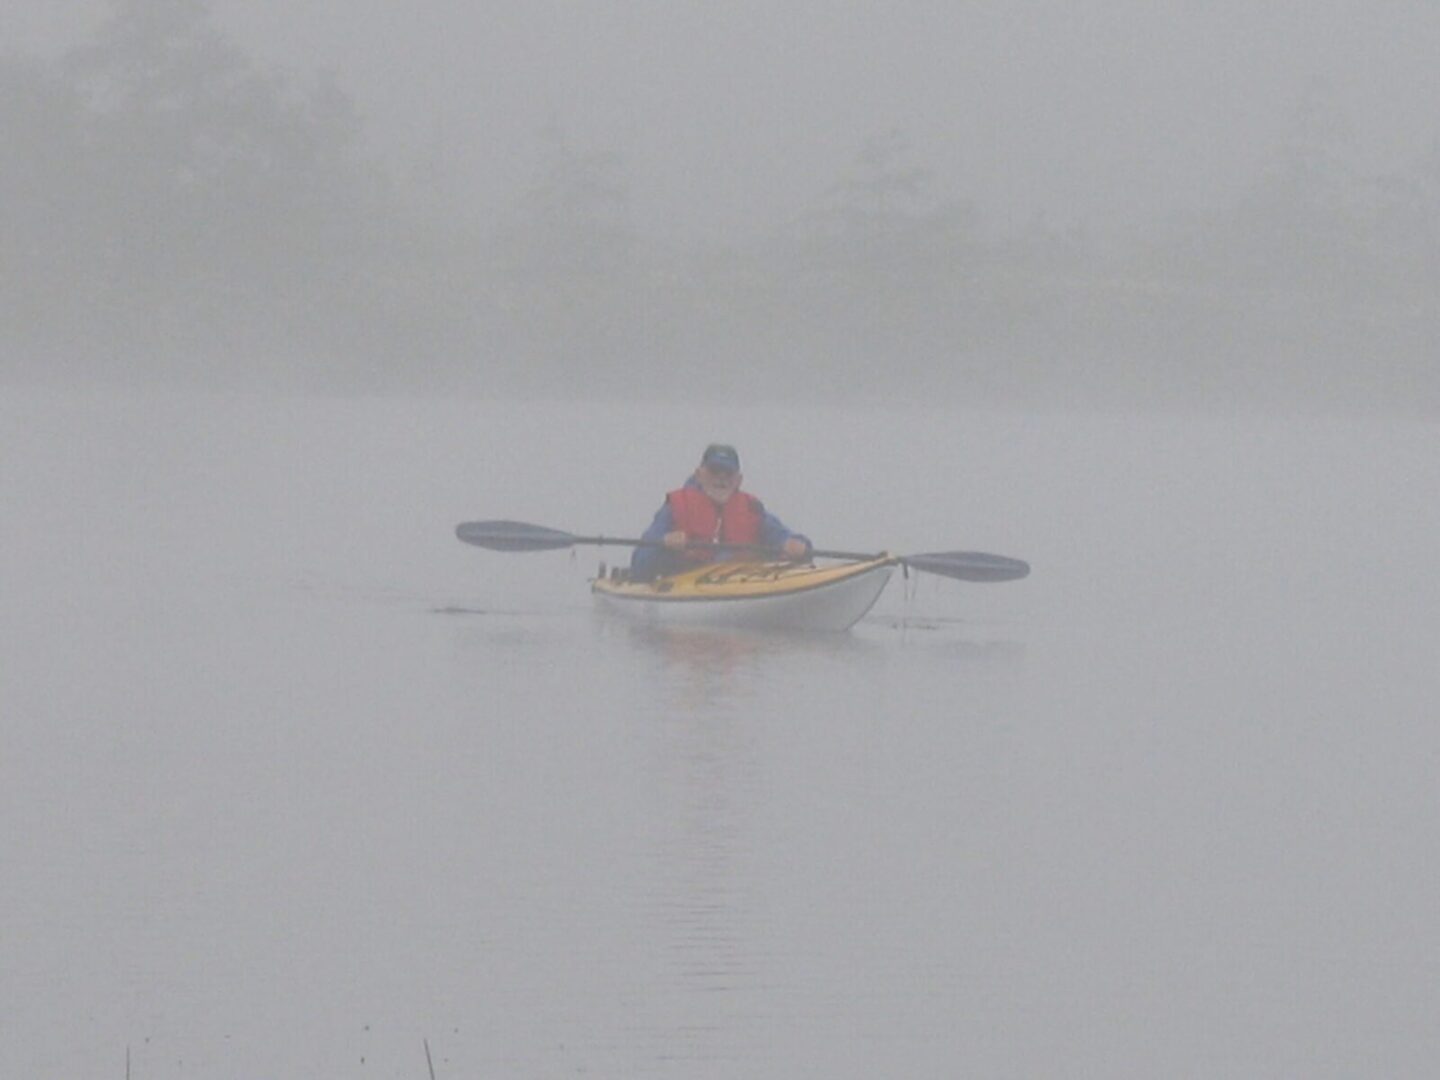 A person in a kayak on a foggy lake.